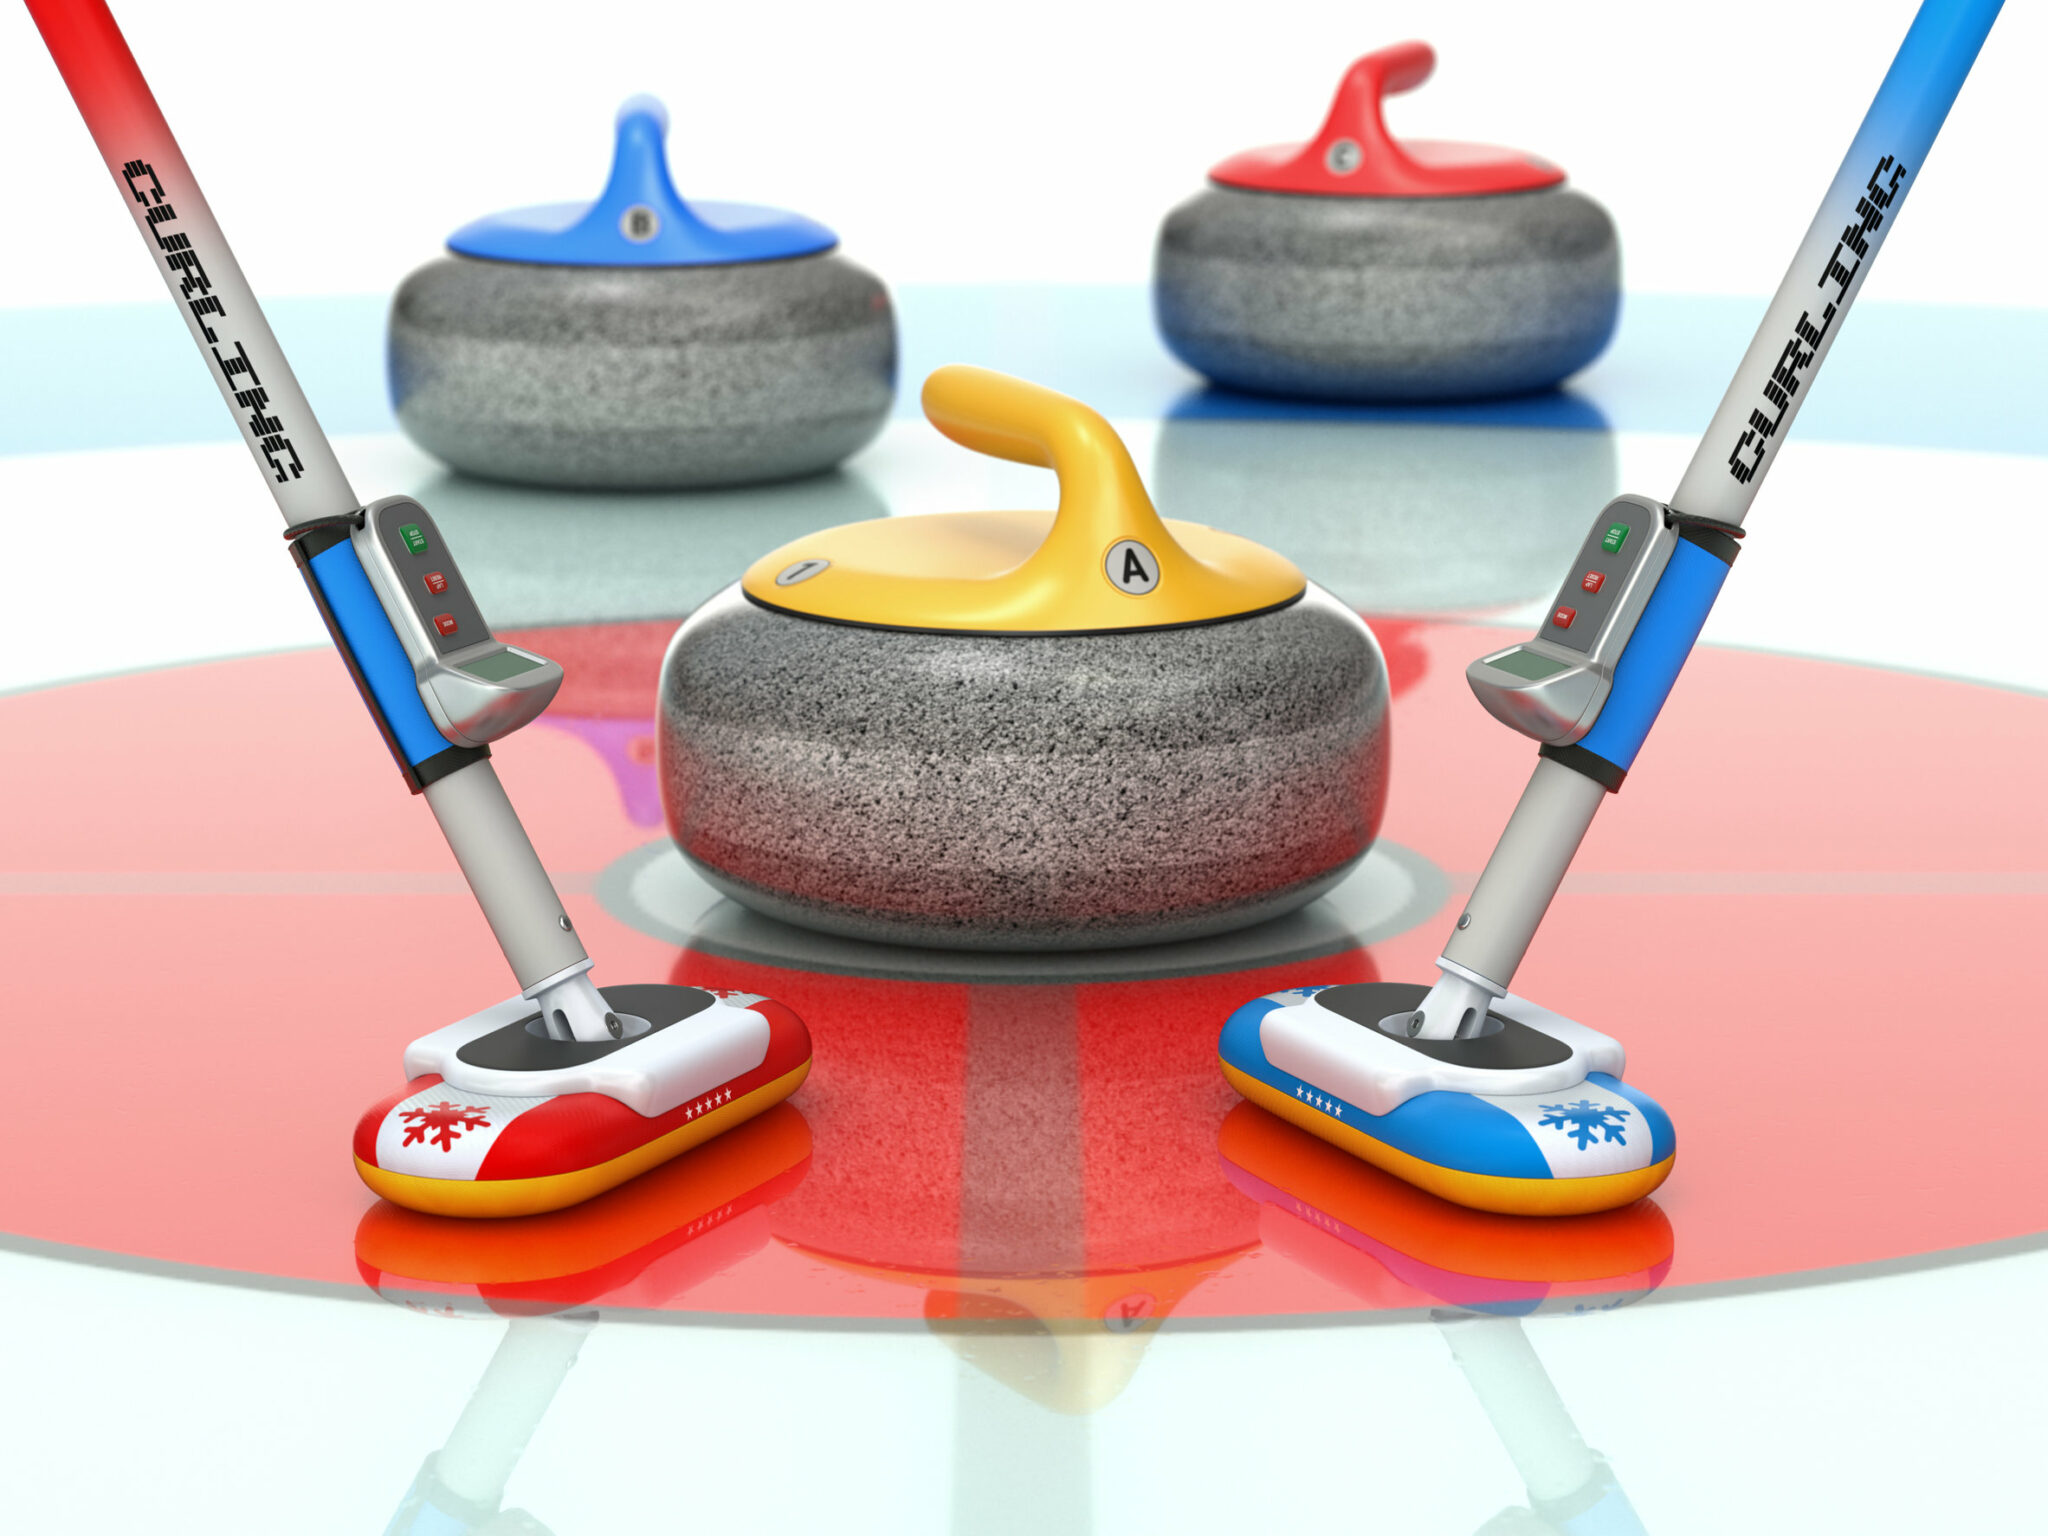 Curling scene with two curling brooms and stones - 3D illustration